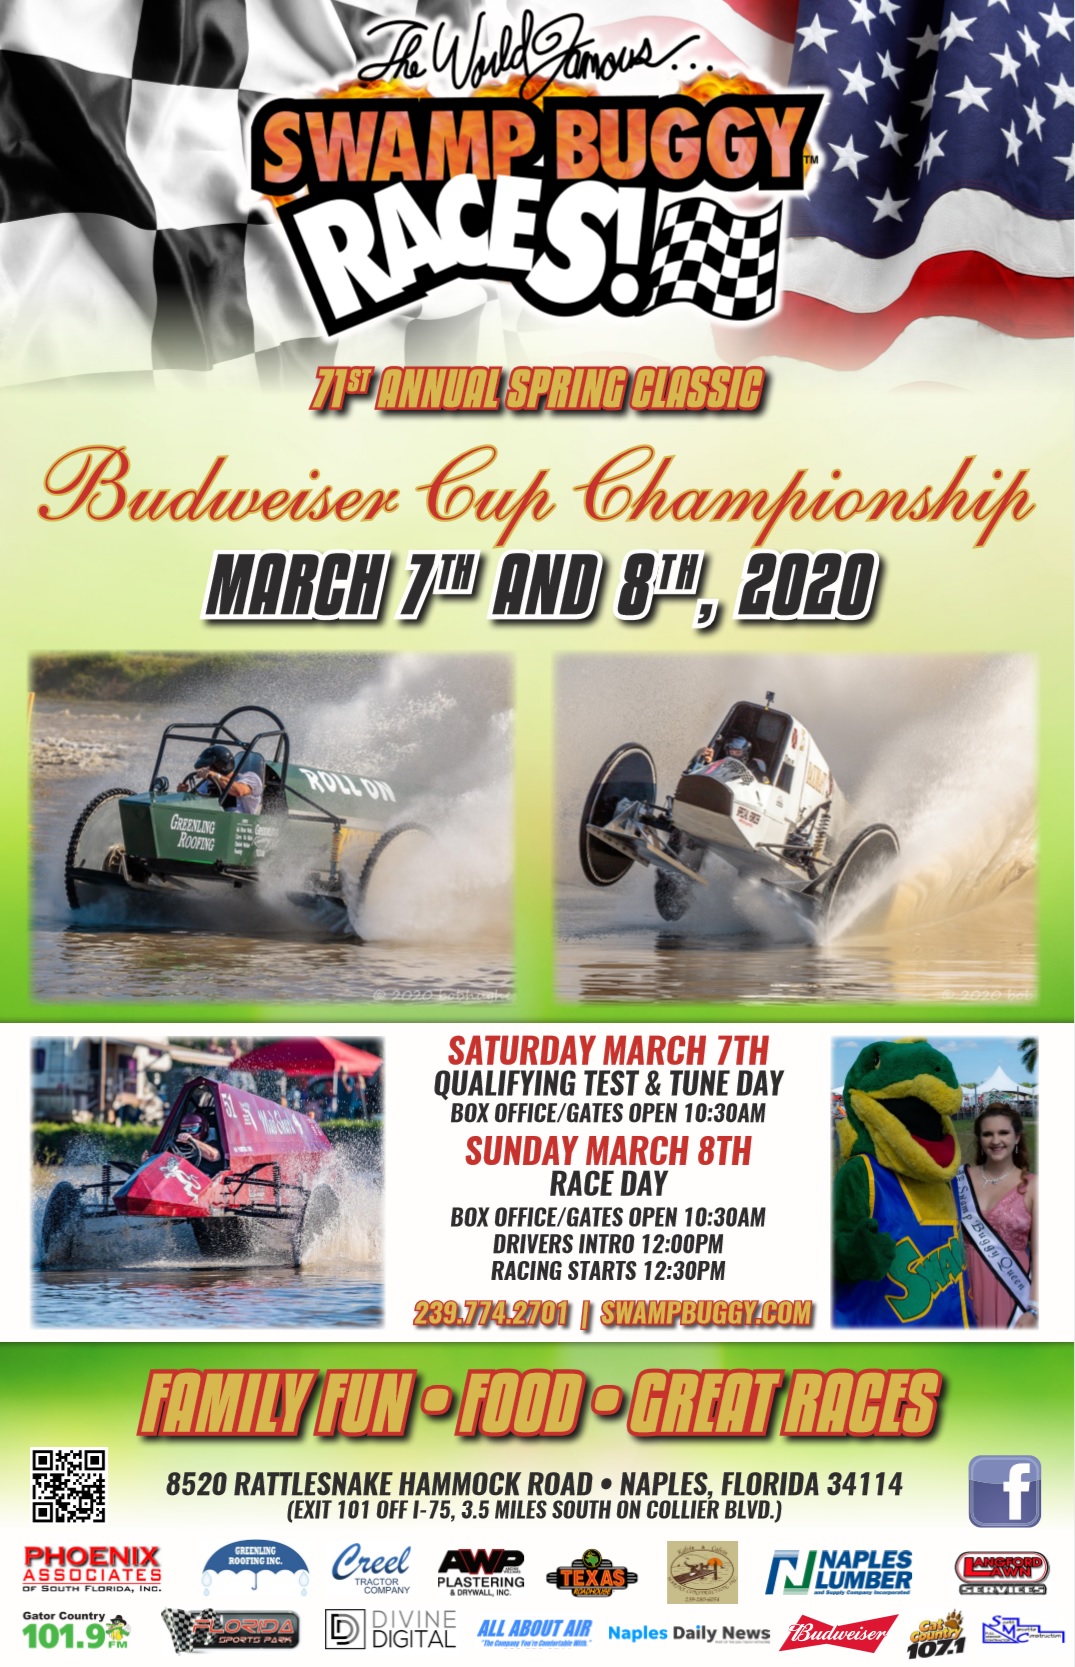 71st Annual Swamp Buggy Races/ BudCup Championship Finale! Coastal